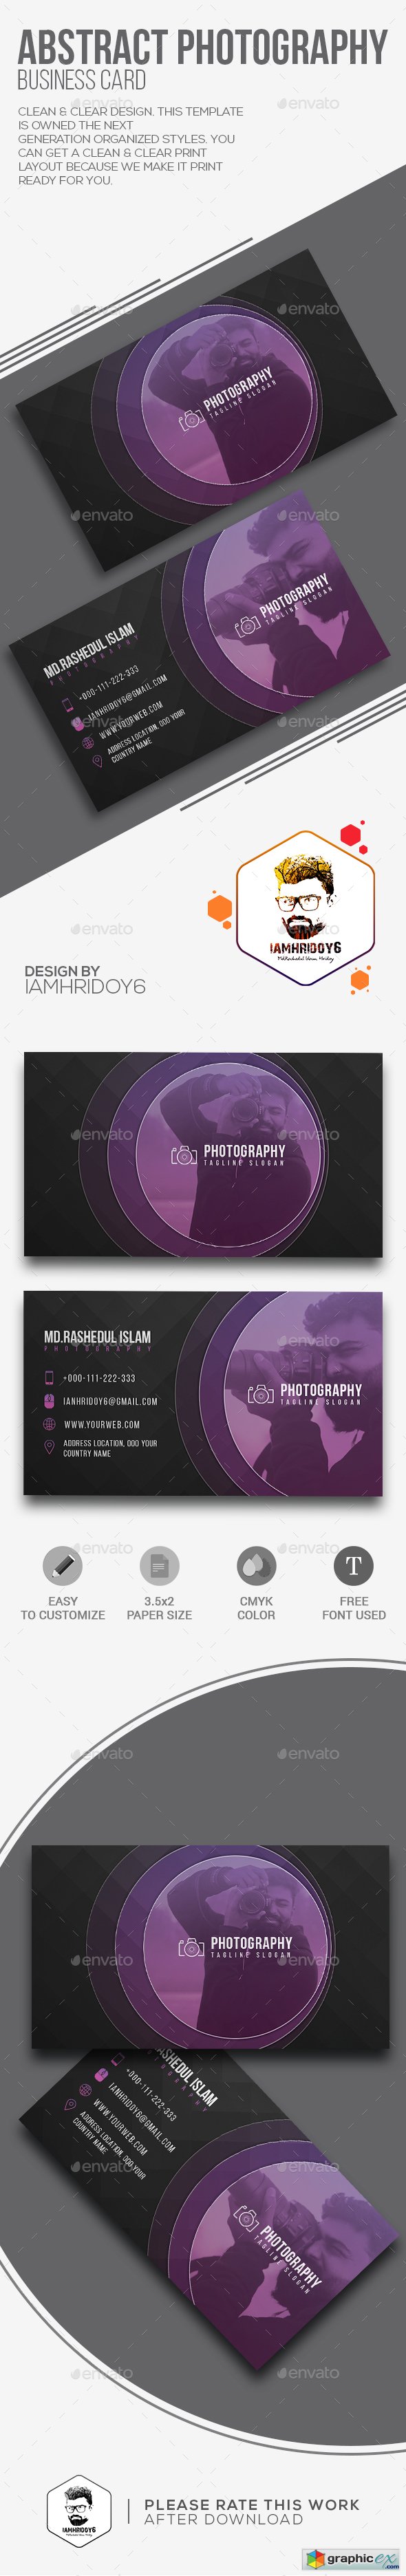 Abstract Photography Business Card